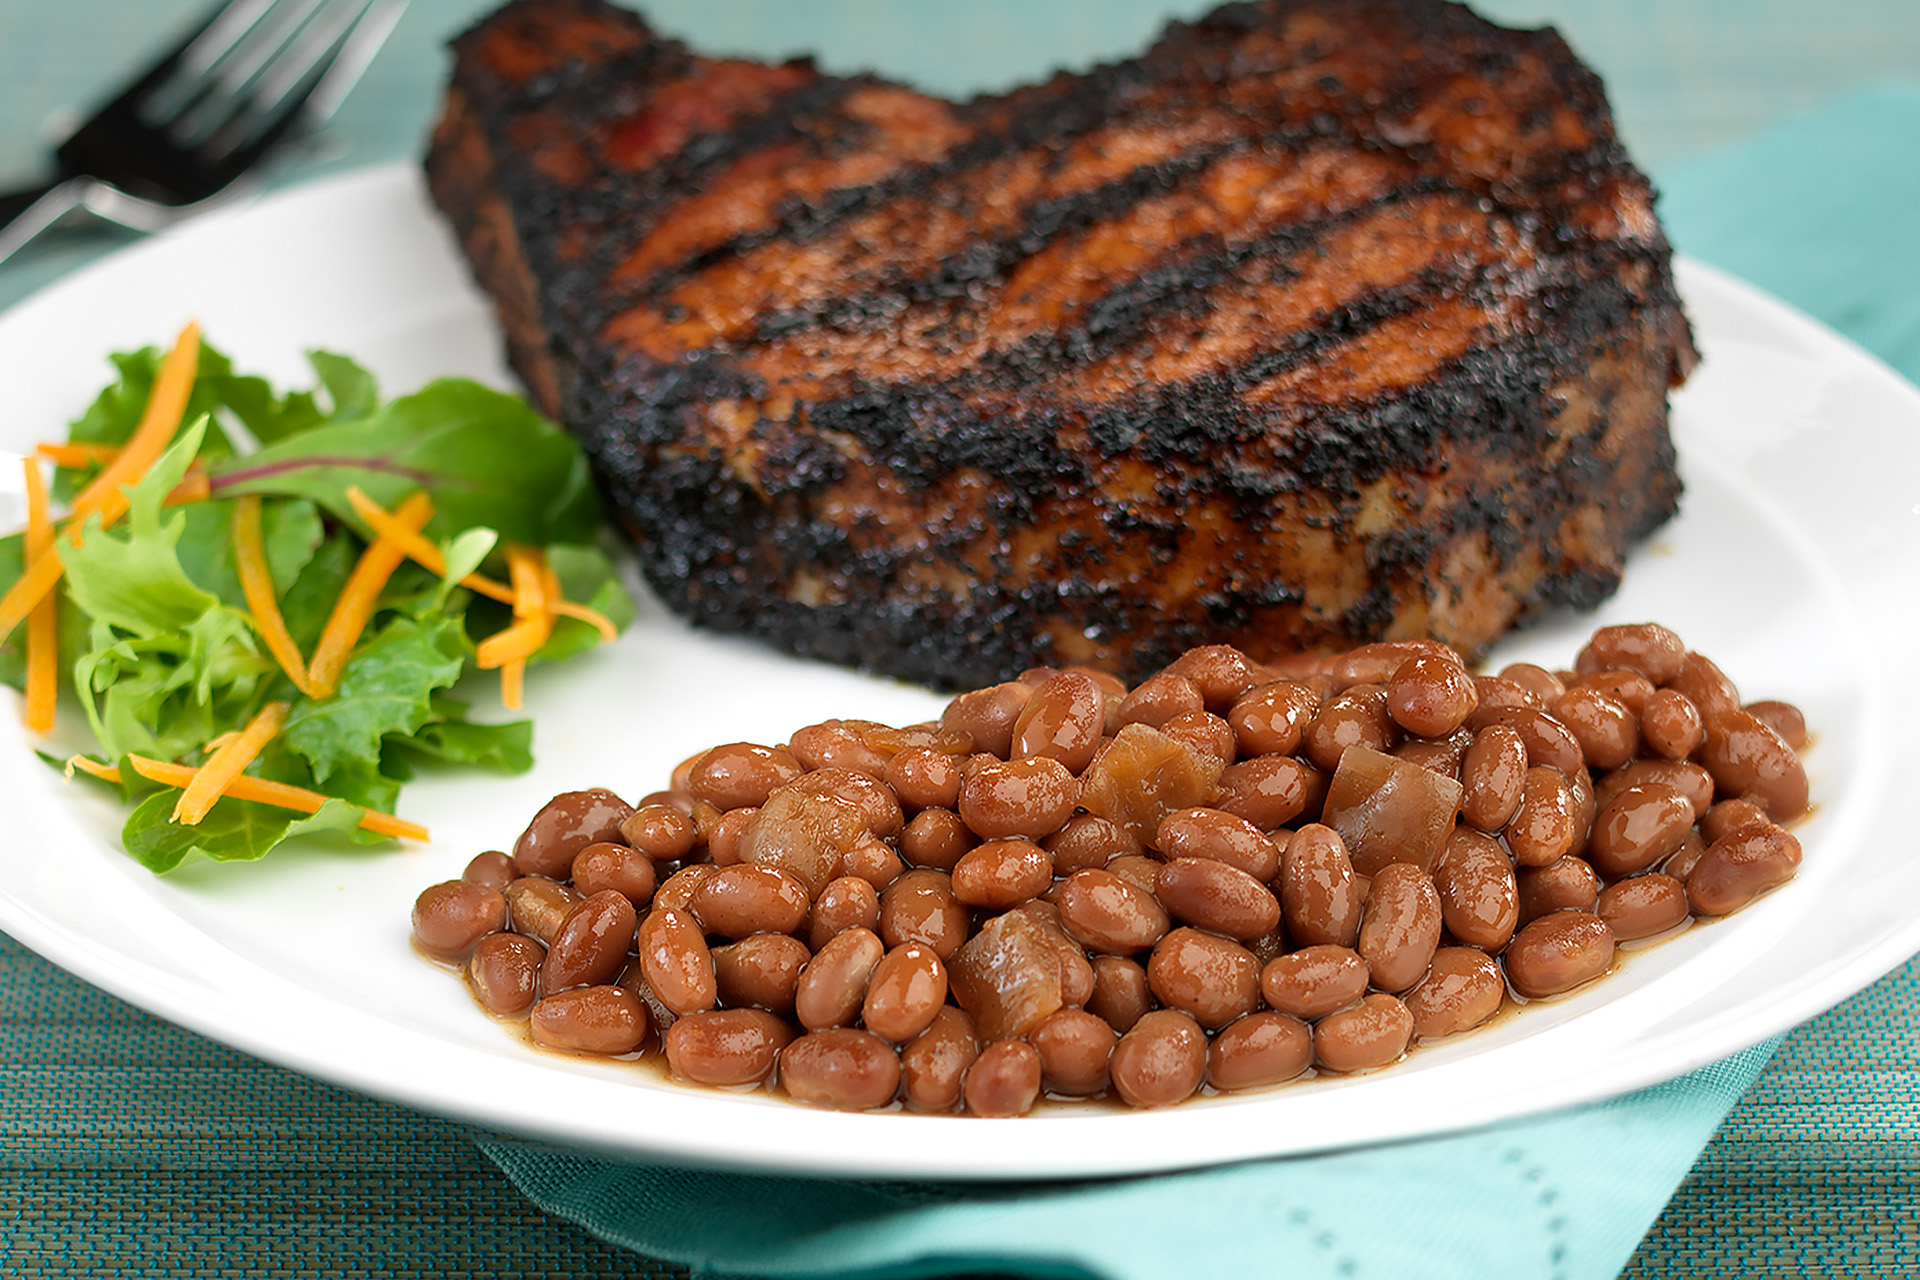 Coffee and chili rubbed pork chop with side of baked beans on white plate